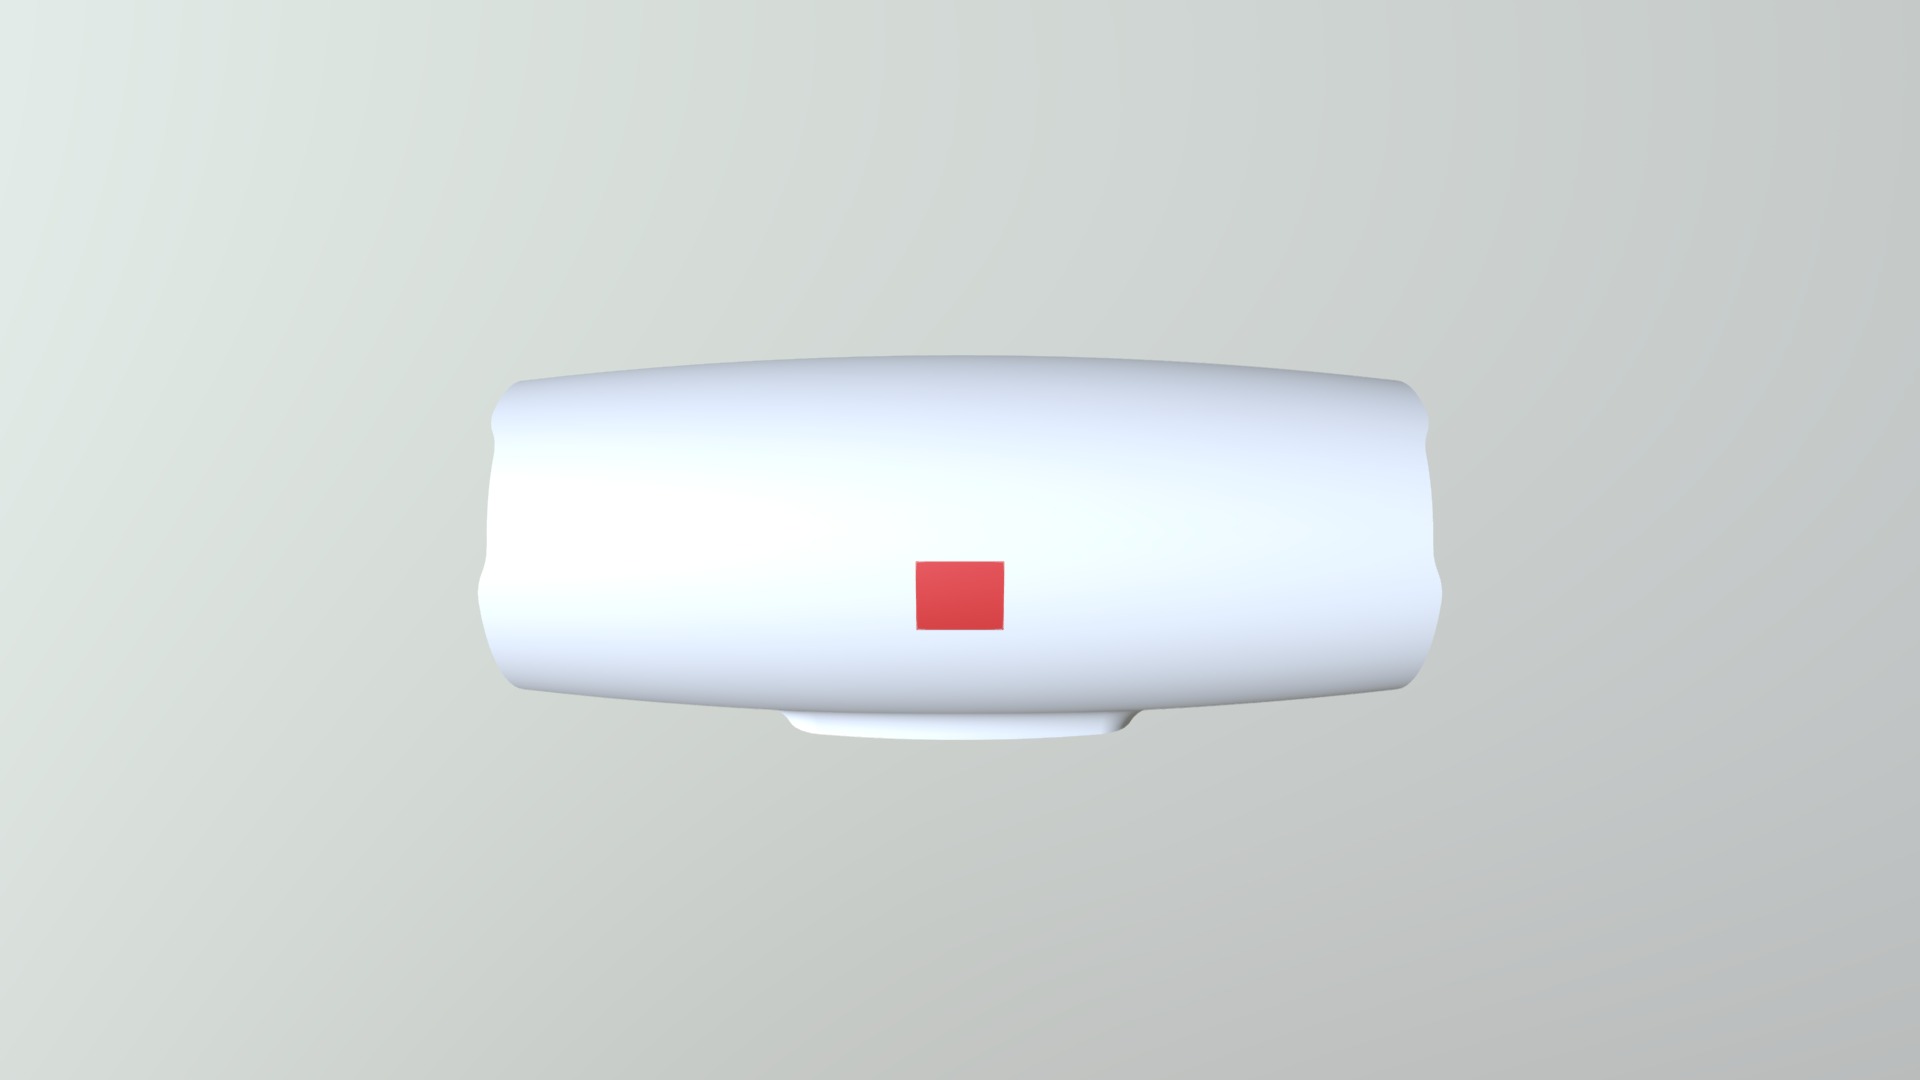 3D model JBL Charge 4 - This is a 3D model of the JBL Charge 4. The 3D model is about a white rectangular object.